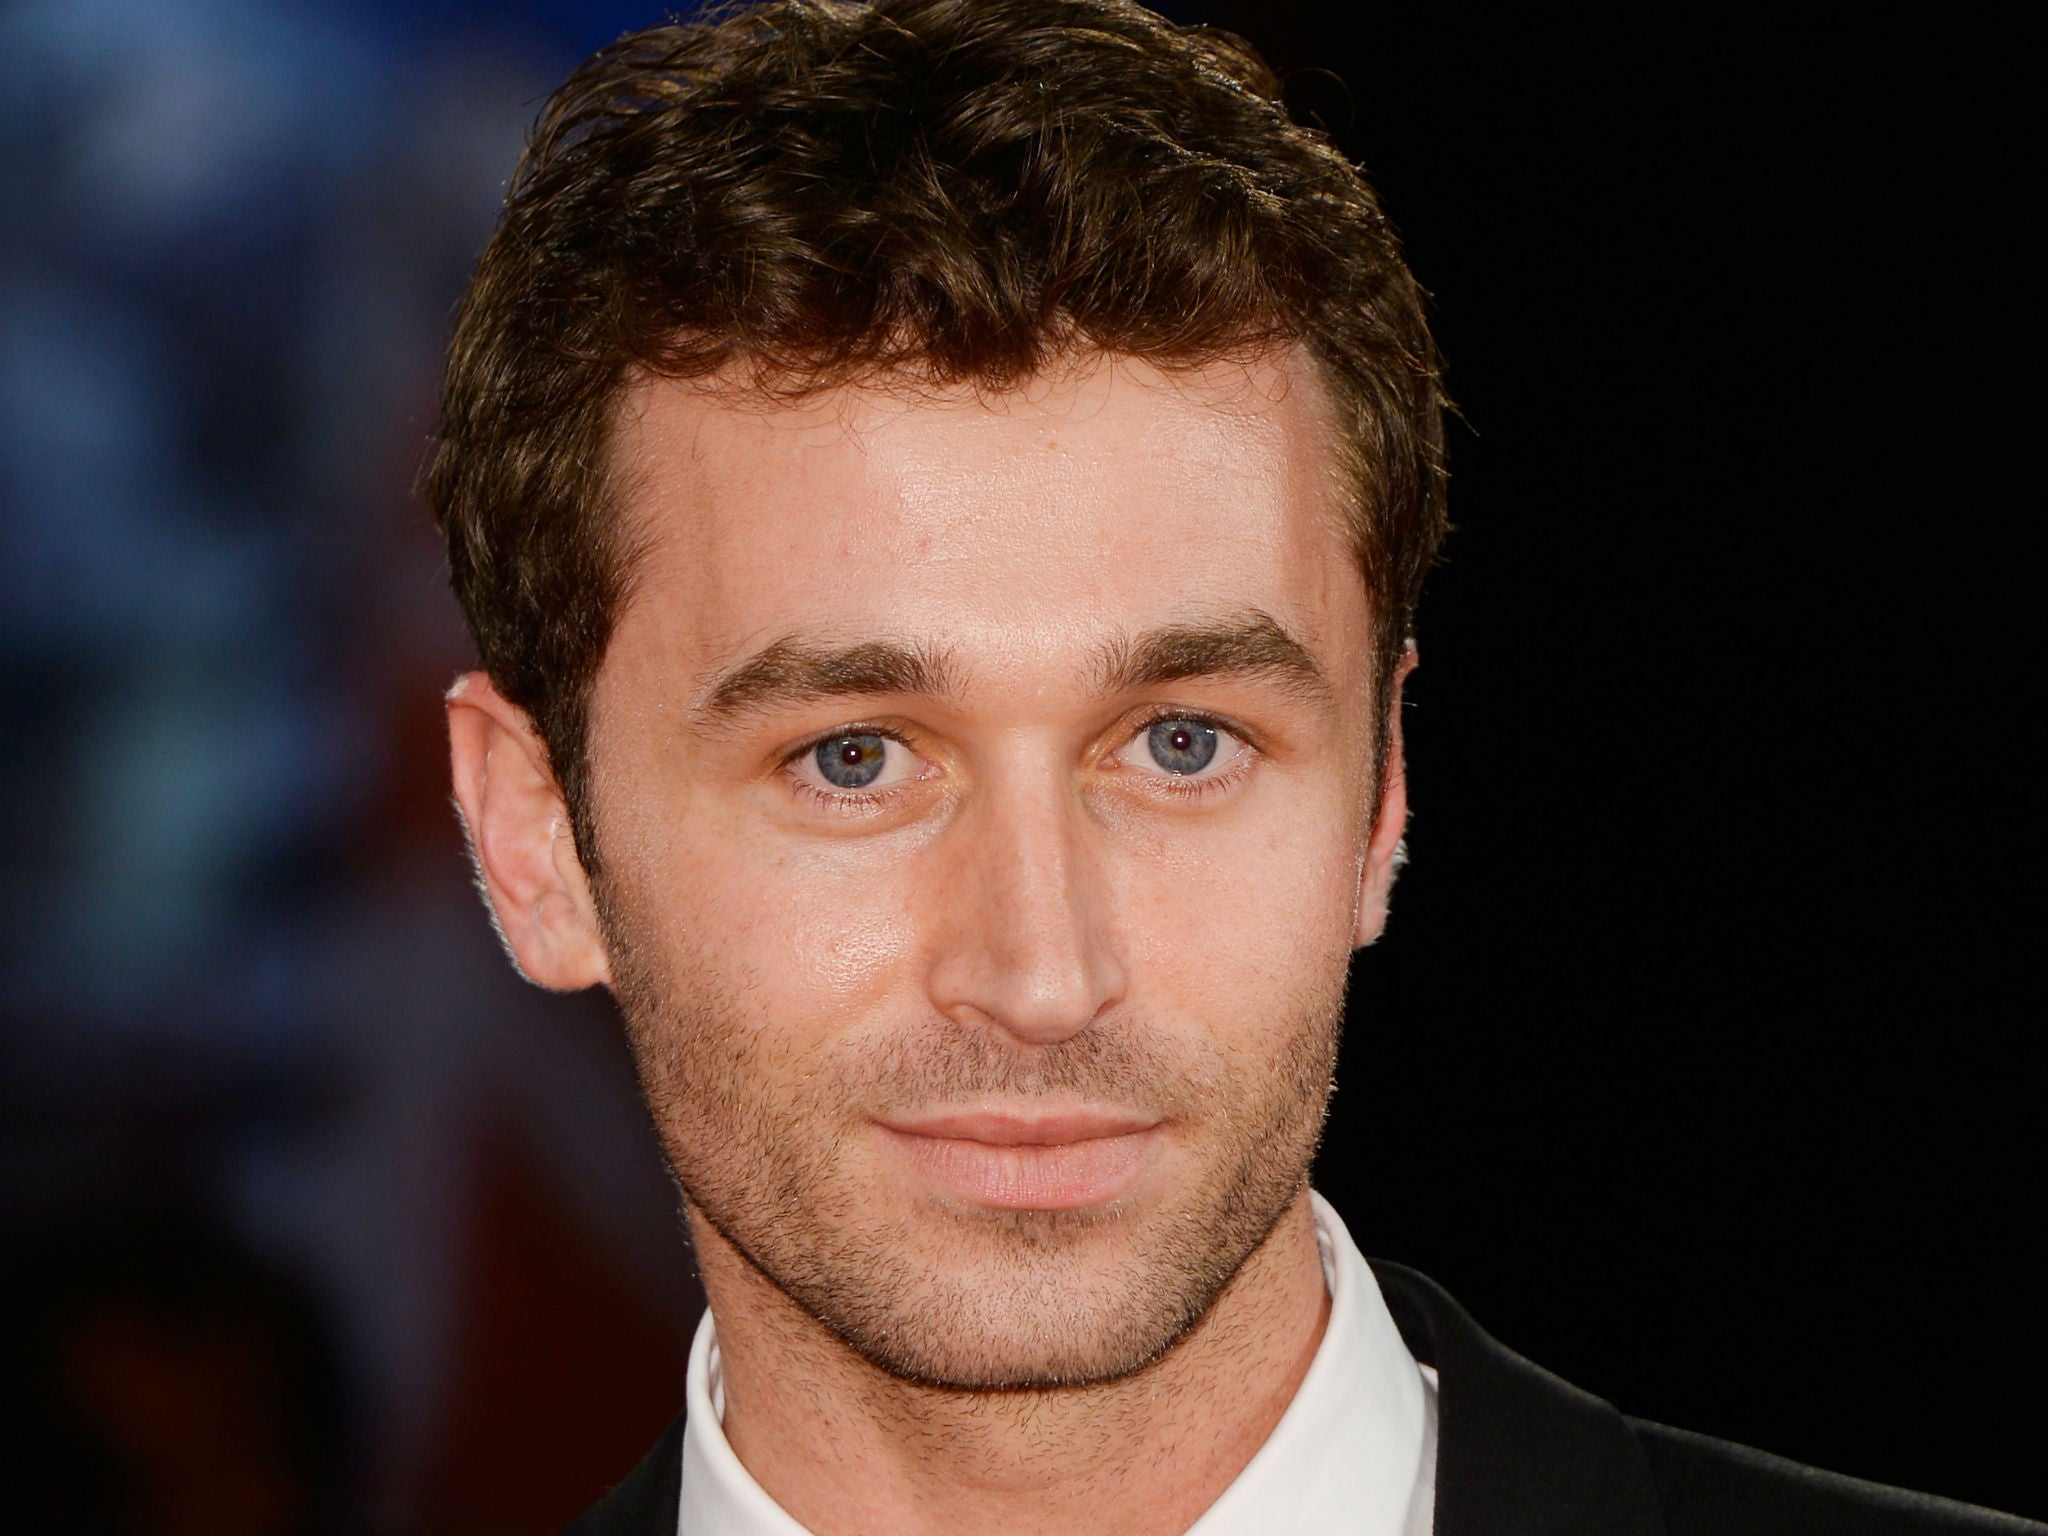 Jamees Deen - James Deen: Porn actor 'baffled' by rape claims and issues further denial |  The Independent | The Independent